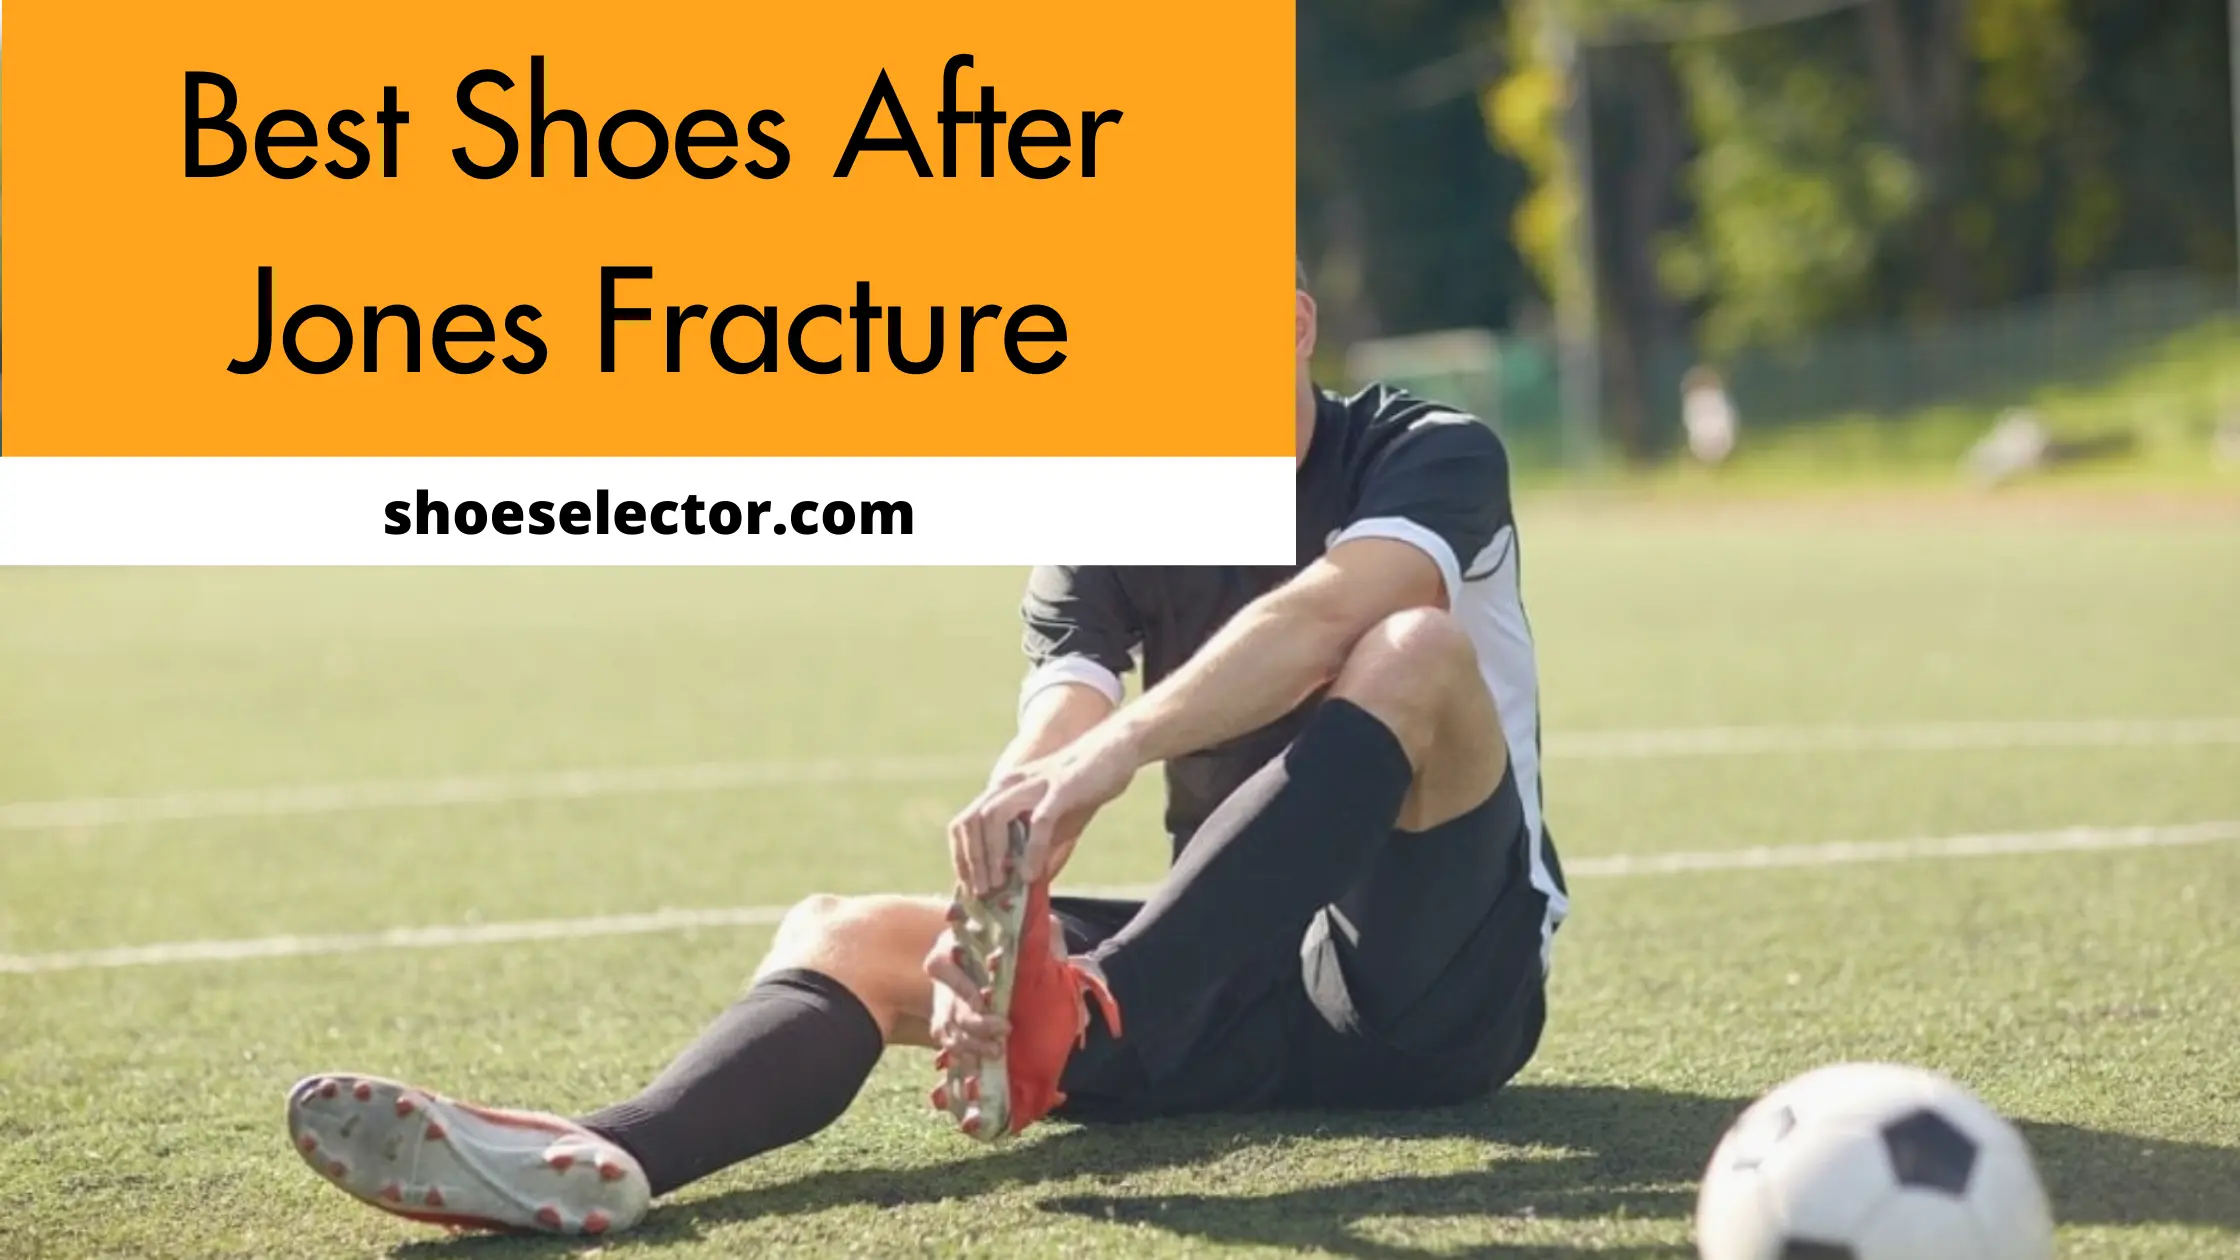 Best Shoes After Jones Fracture With Products Comparison